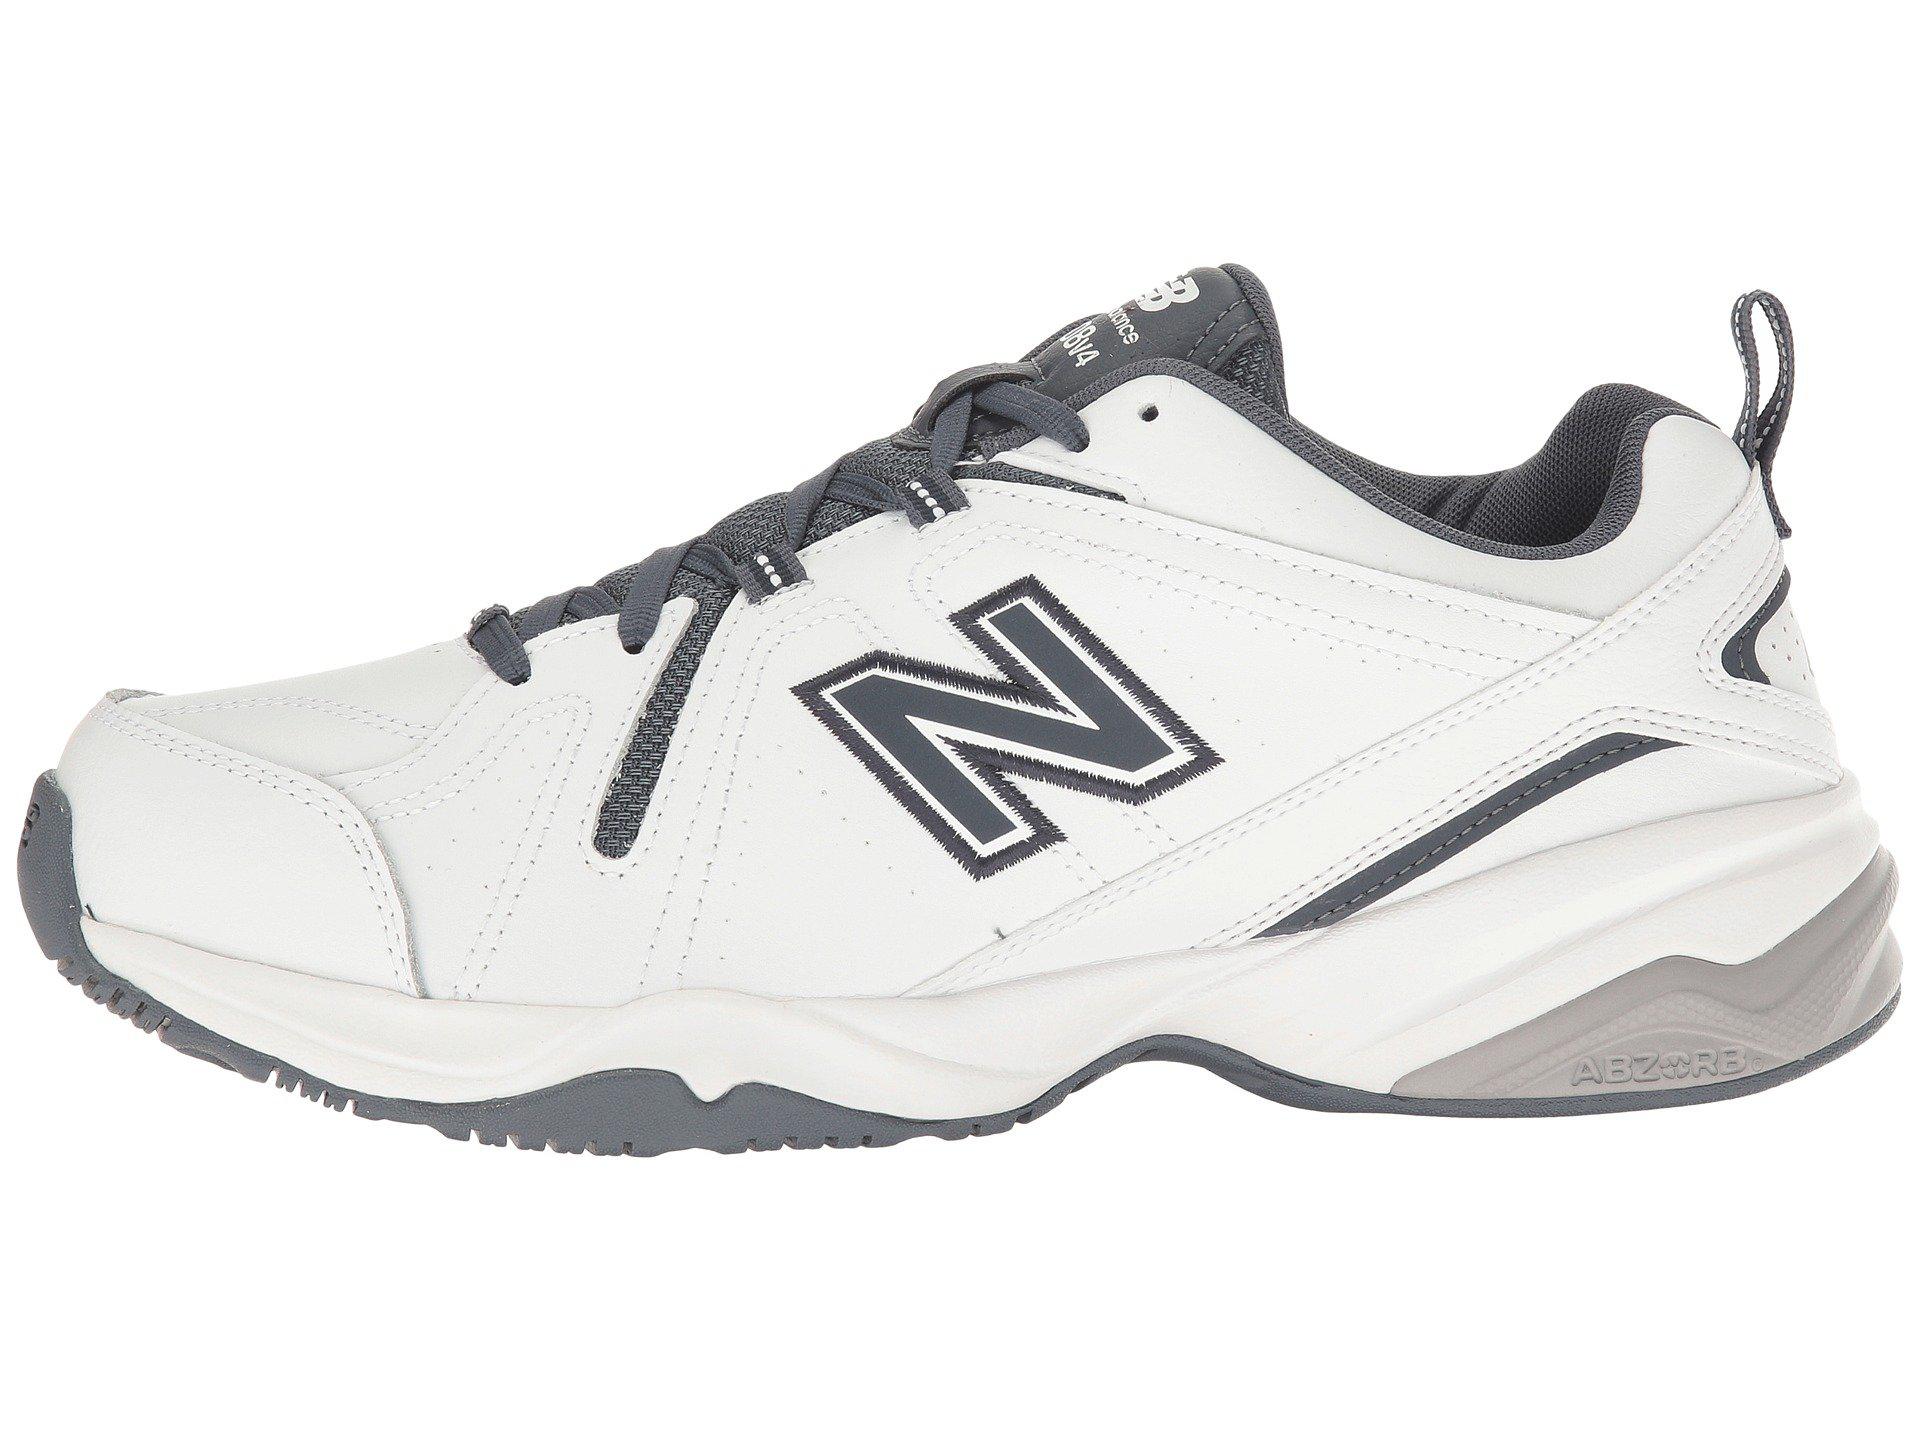 New Balance Leather Mx608v4 (brown) Men's Walking Shoes in White for ...